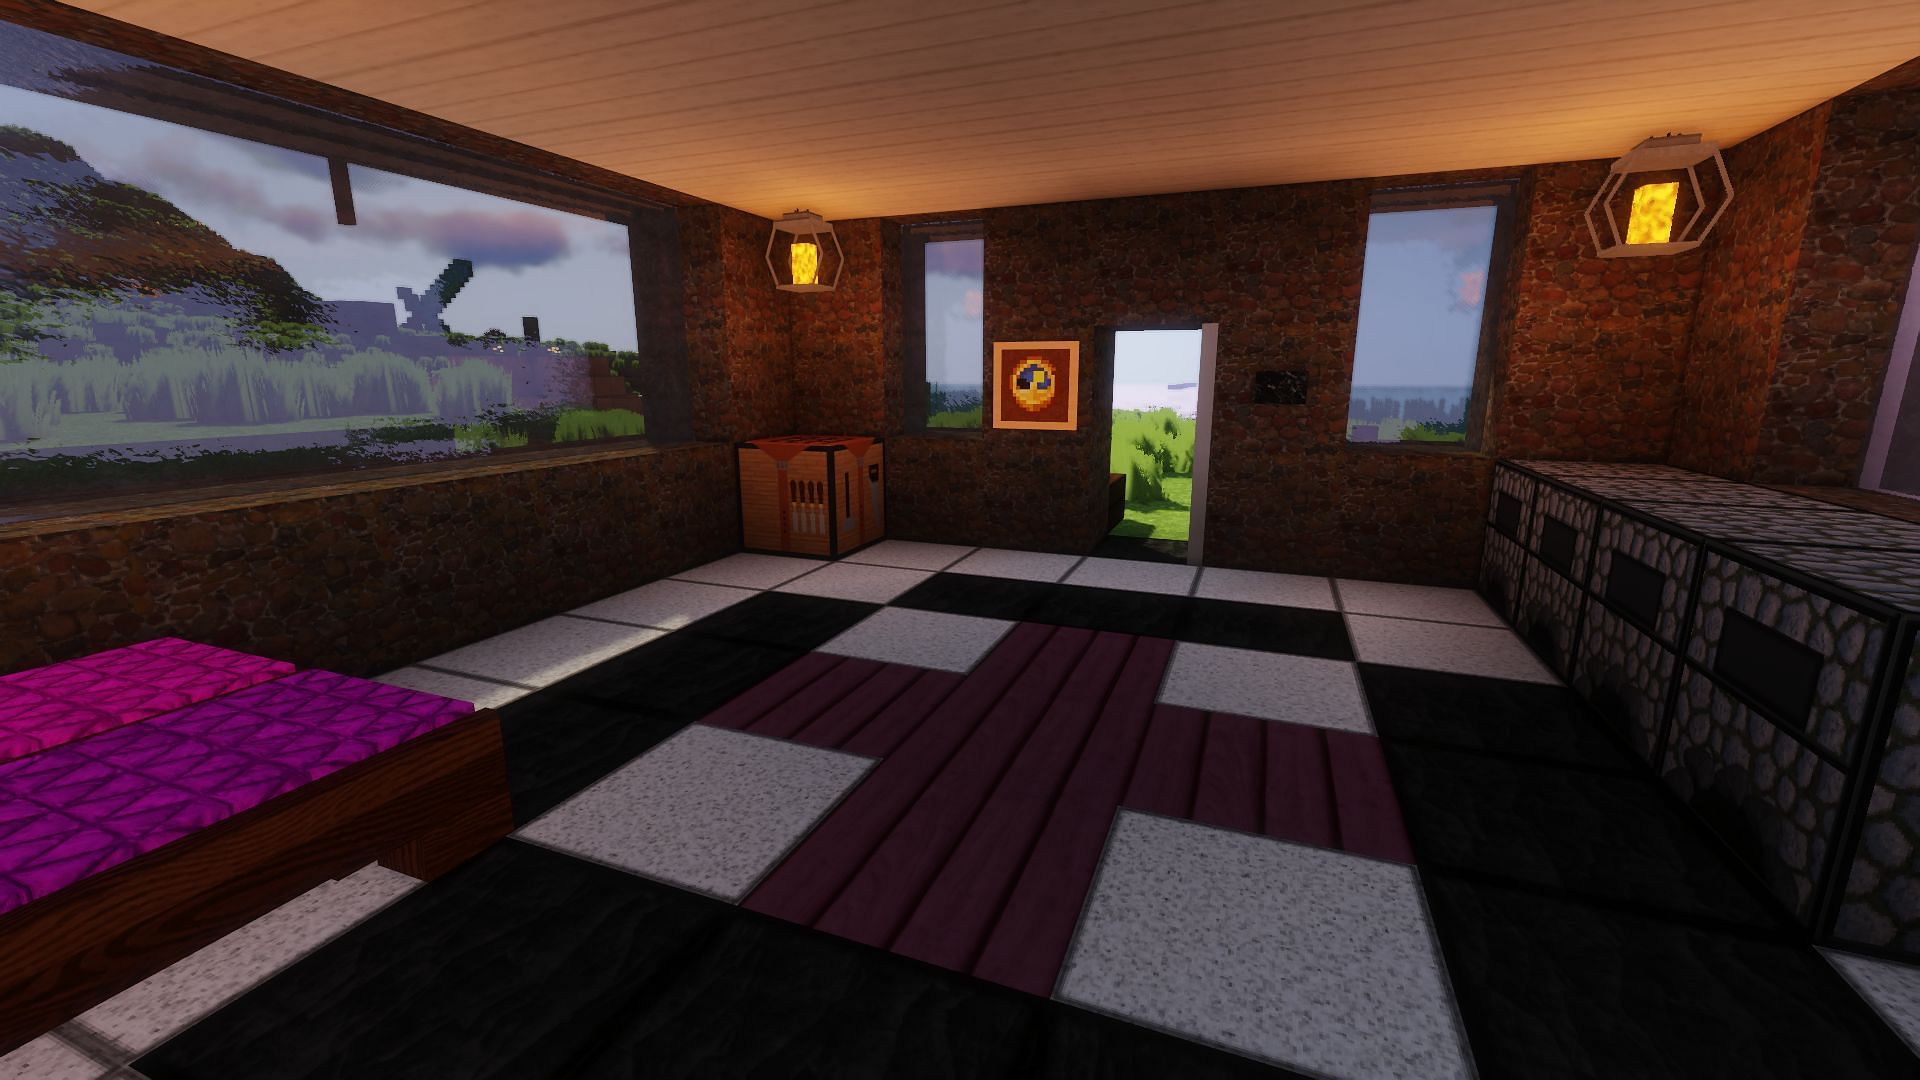 The build with the Urban texture pack (Image via Minecraft)